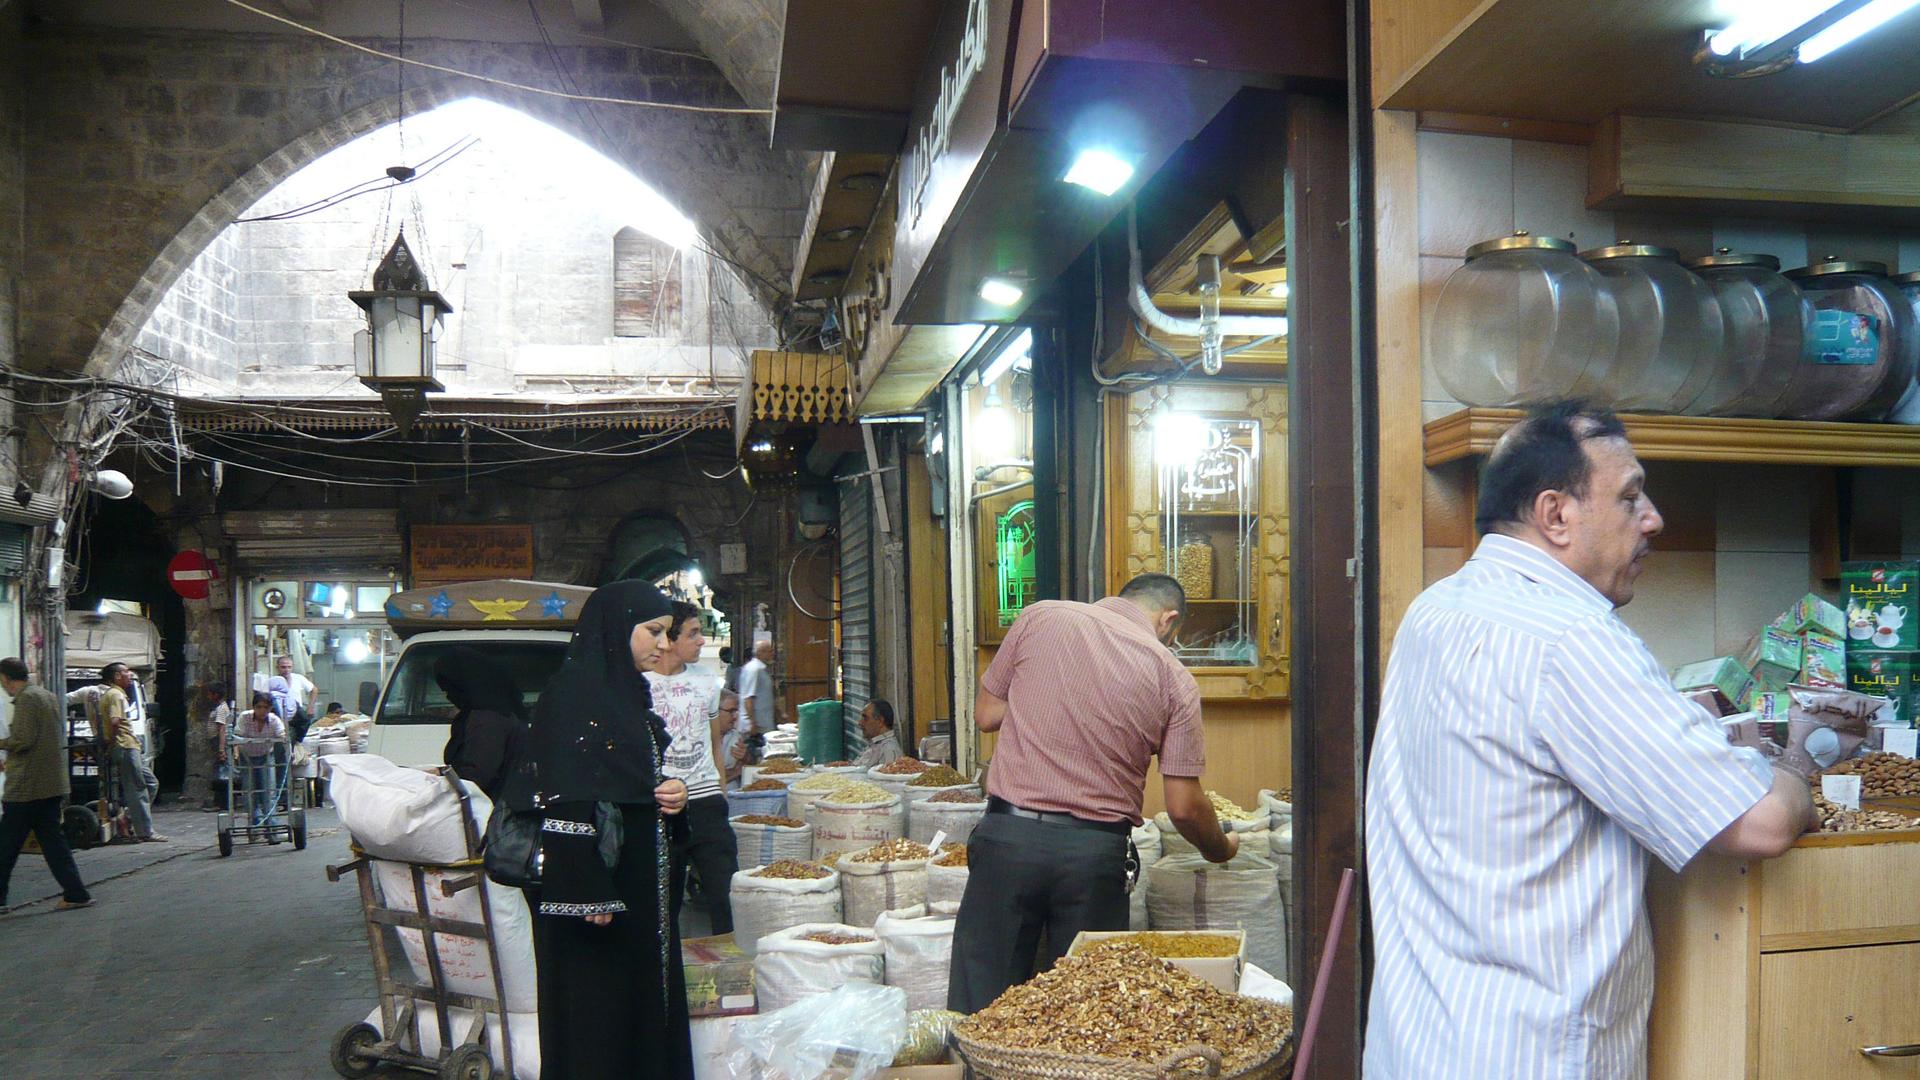 Several people look at bags of dried ingredients laid outside a shop. In the foreground, a man leans against a stall.